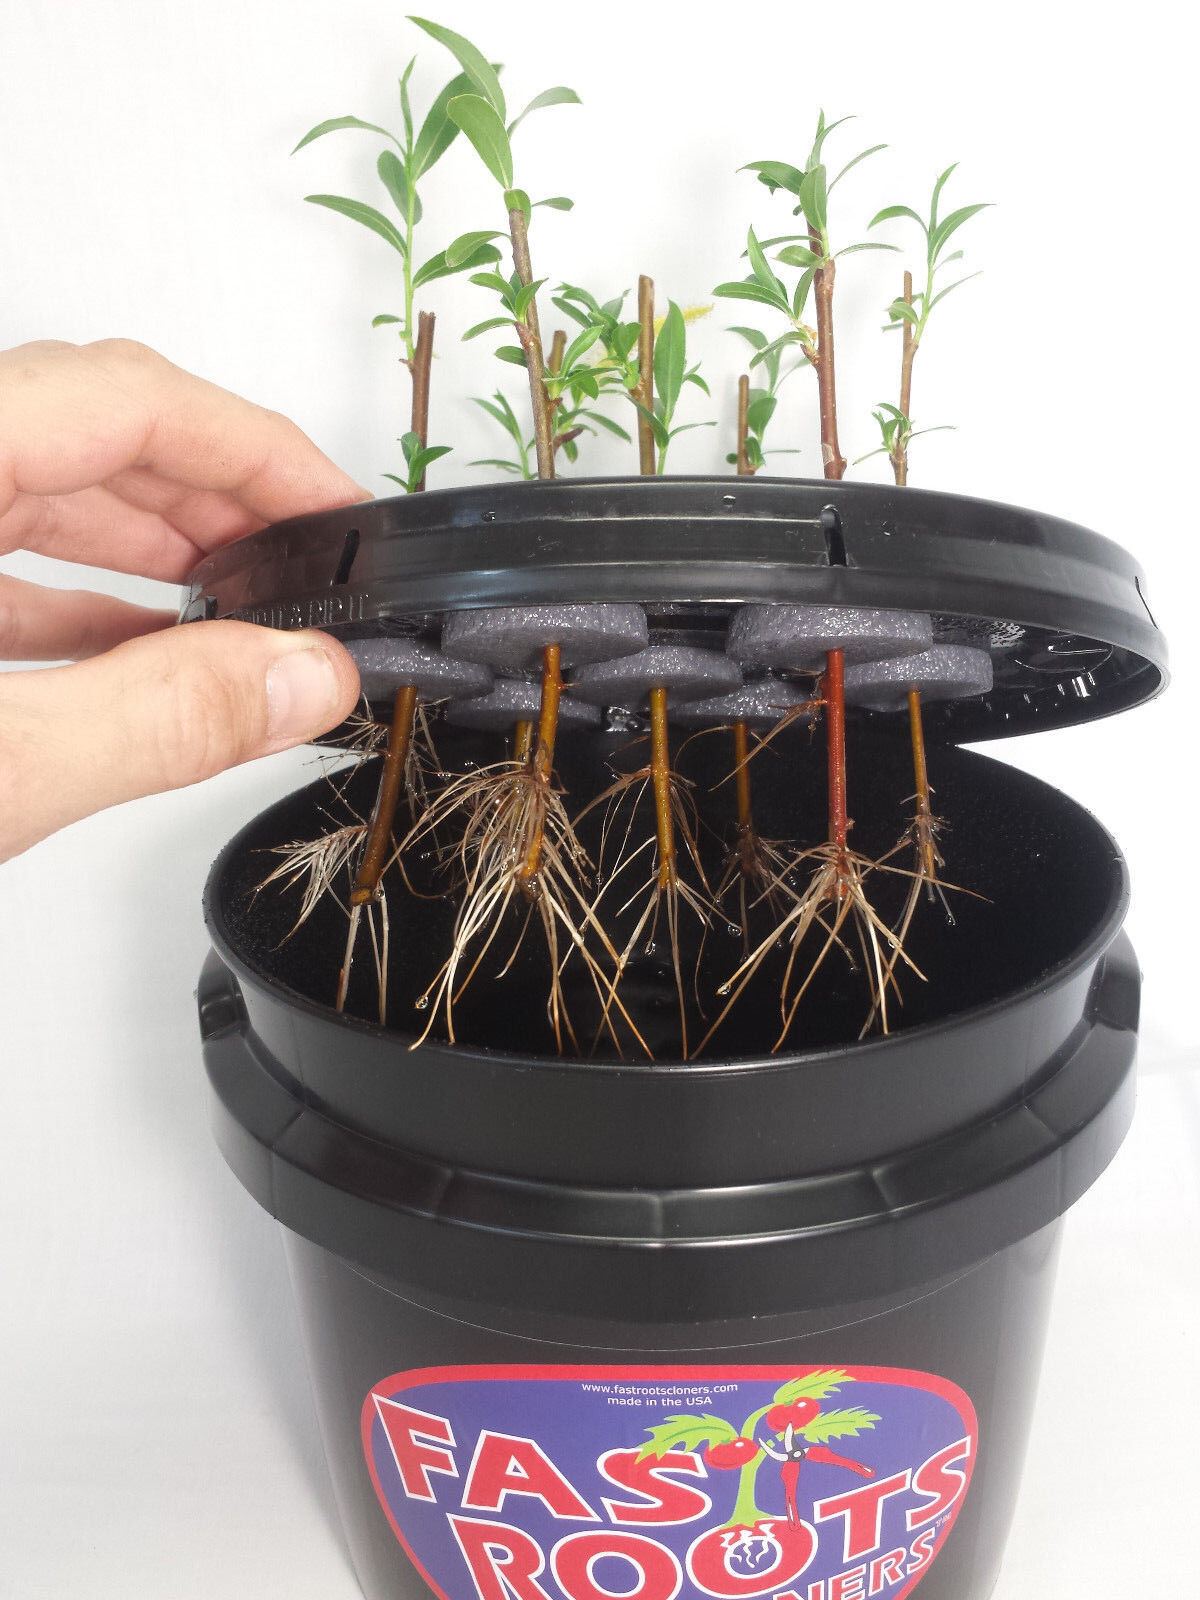 7 Site Indoor Plant Cloning System - Root Growing Air Bubbler Hydroponics Kit